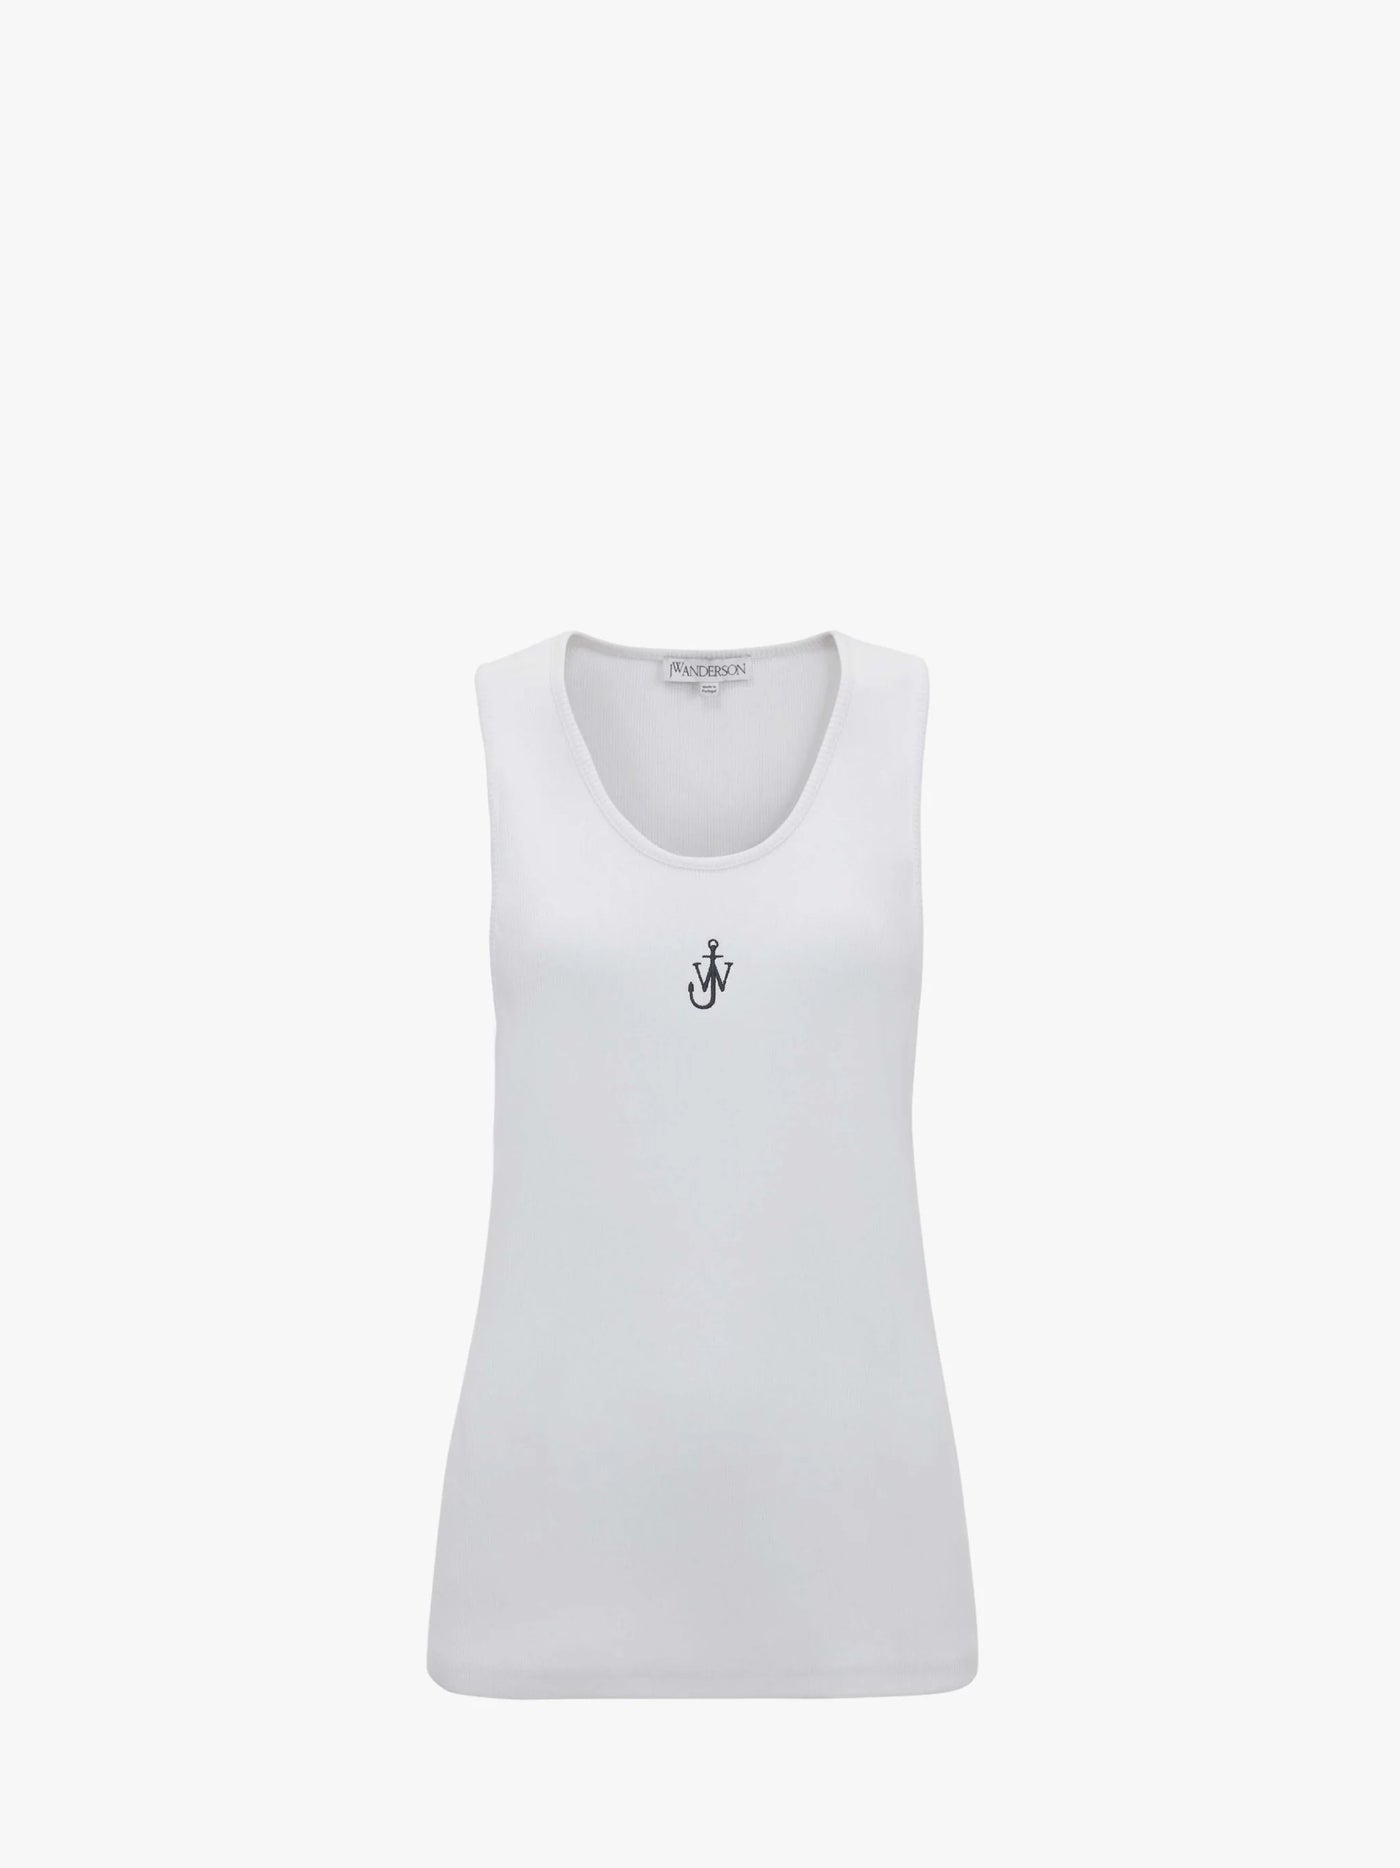 TANK TOP WITH ANCHOR LOGO EMBROIDERY - White